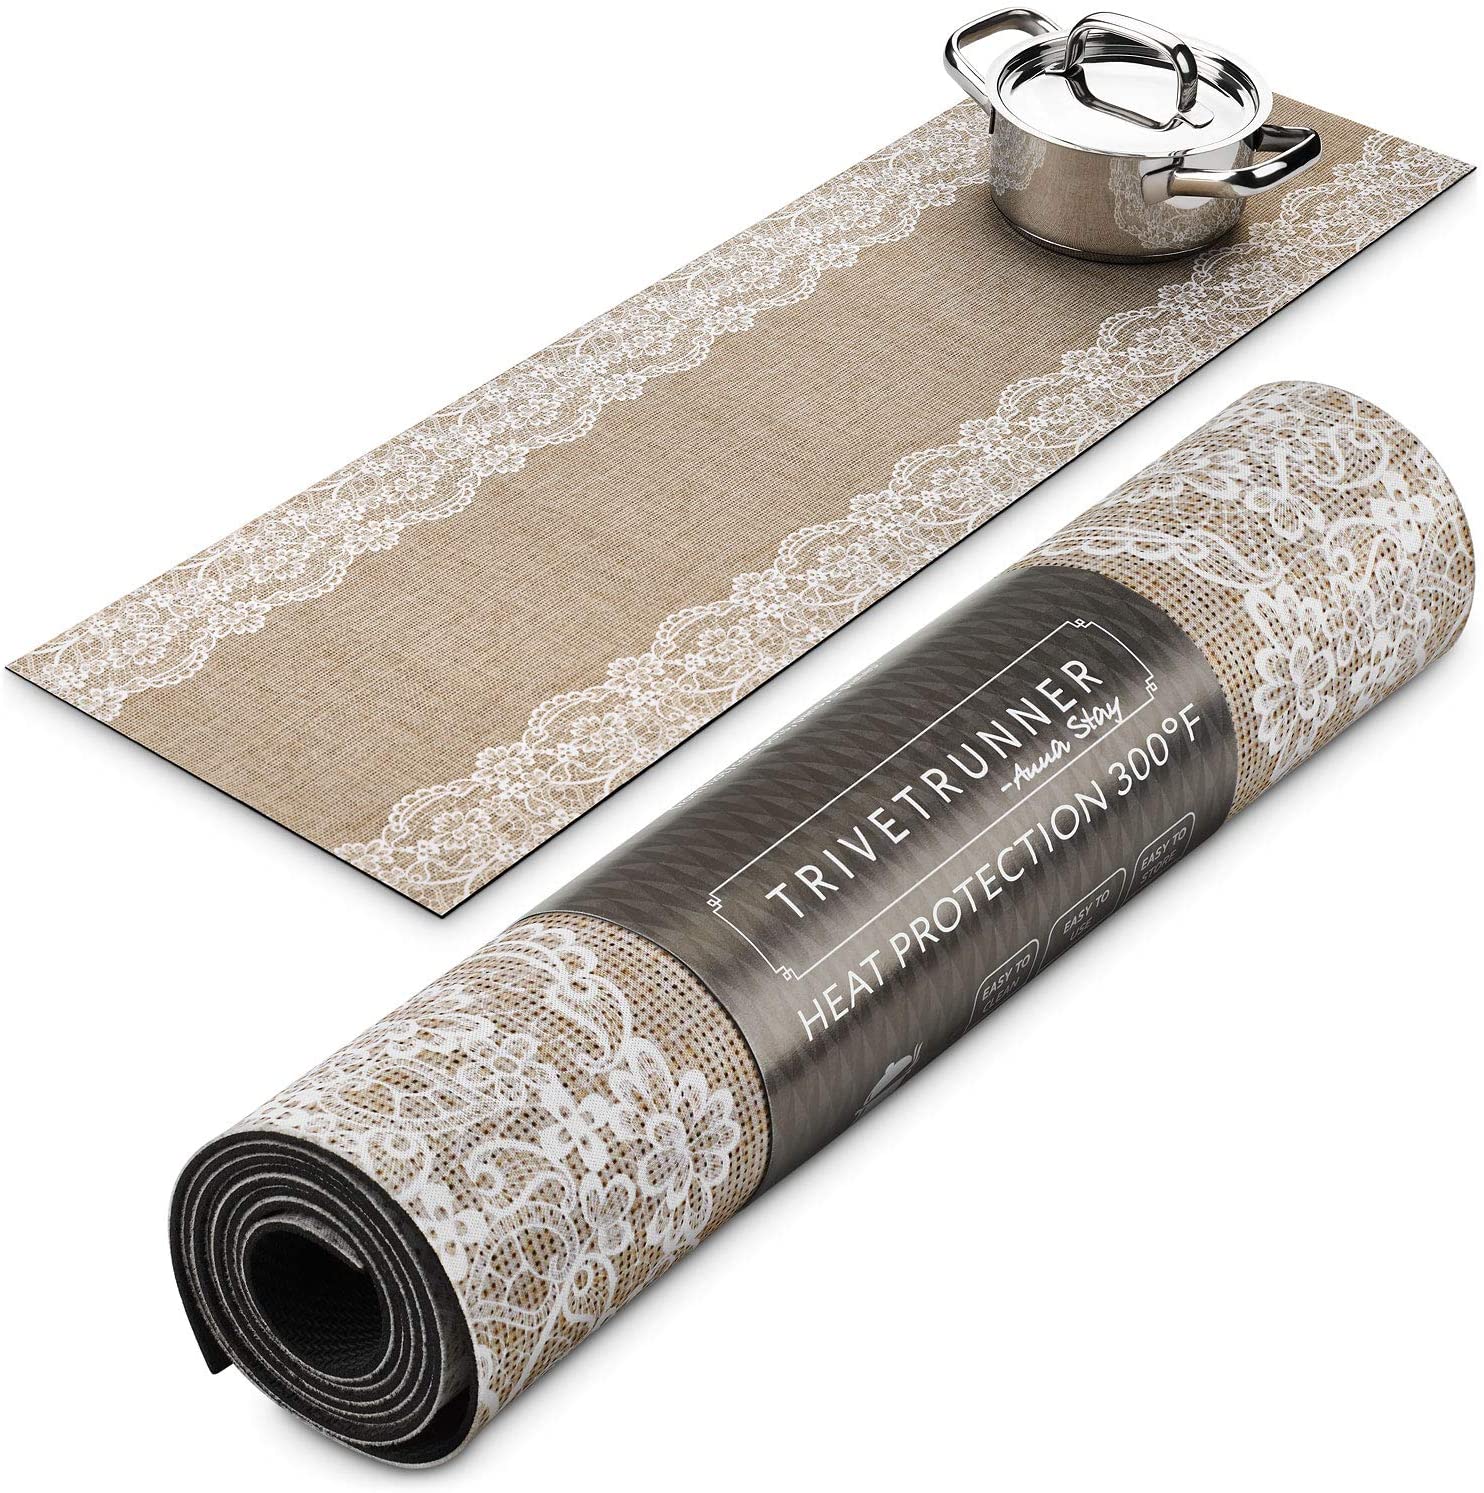 ANNA STAY | DECORATIVE TRIVET & KITCHEN TABLE RUNNERS | LONG | JUTE & LACE